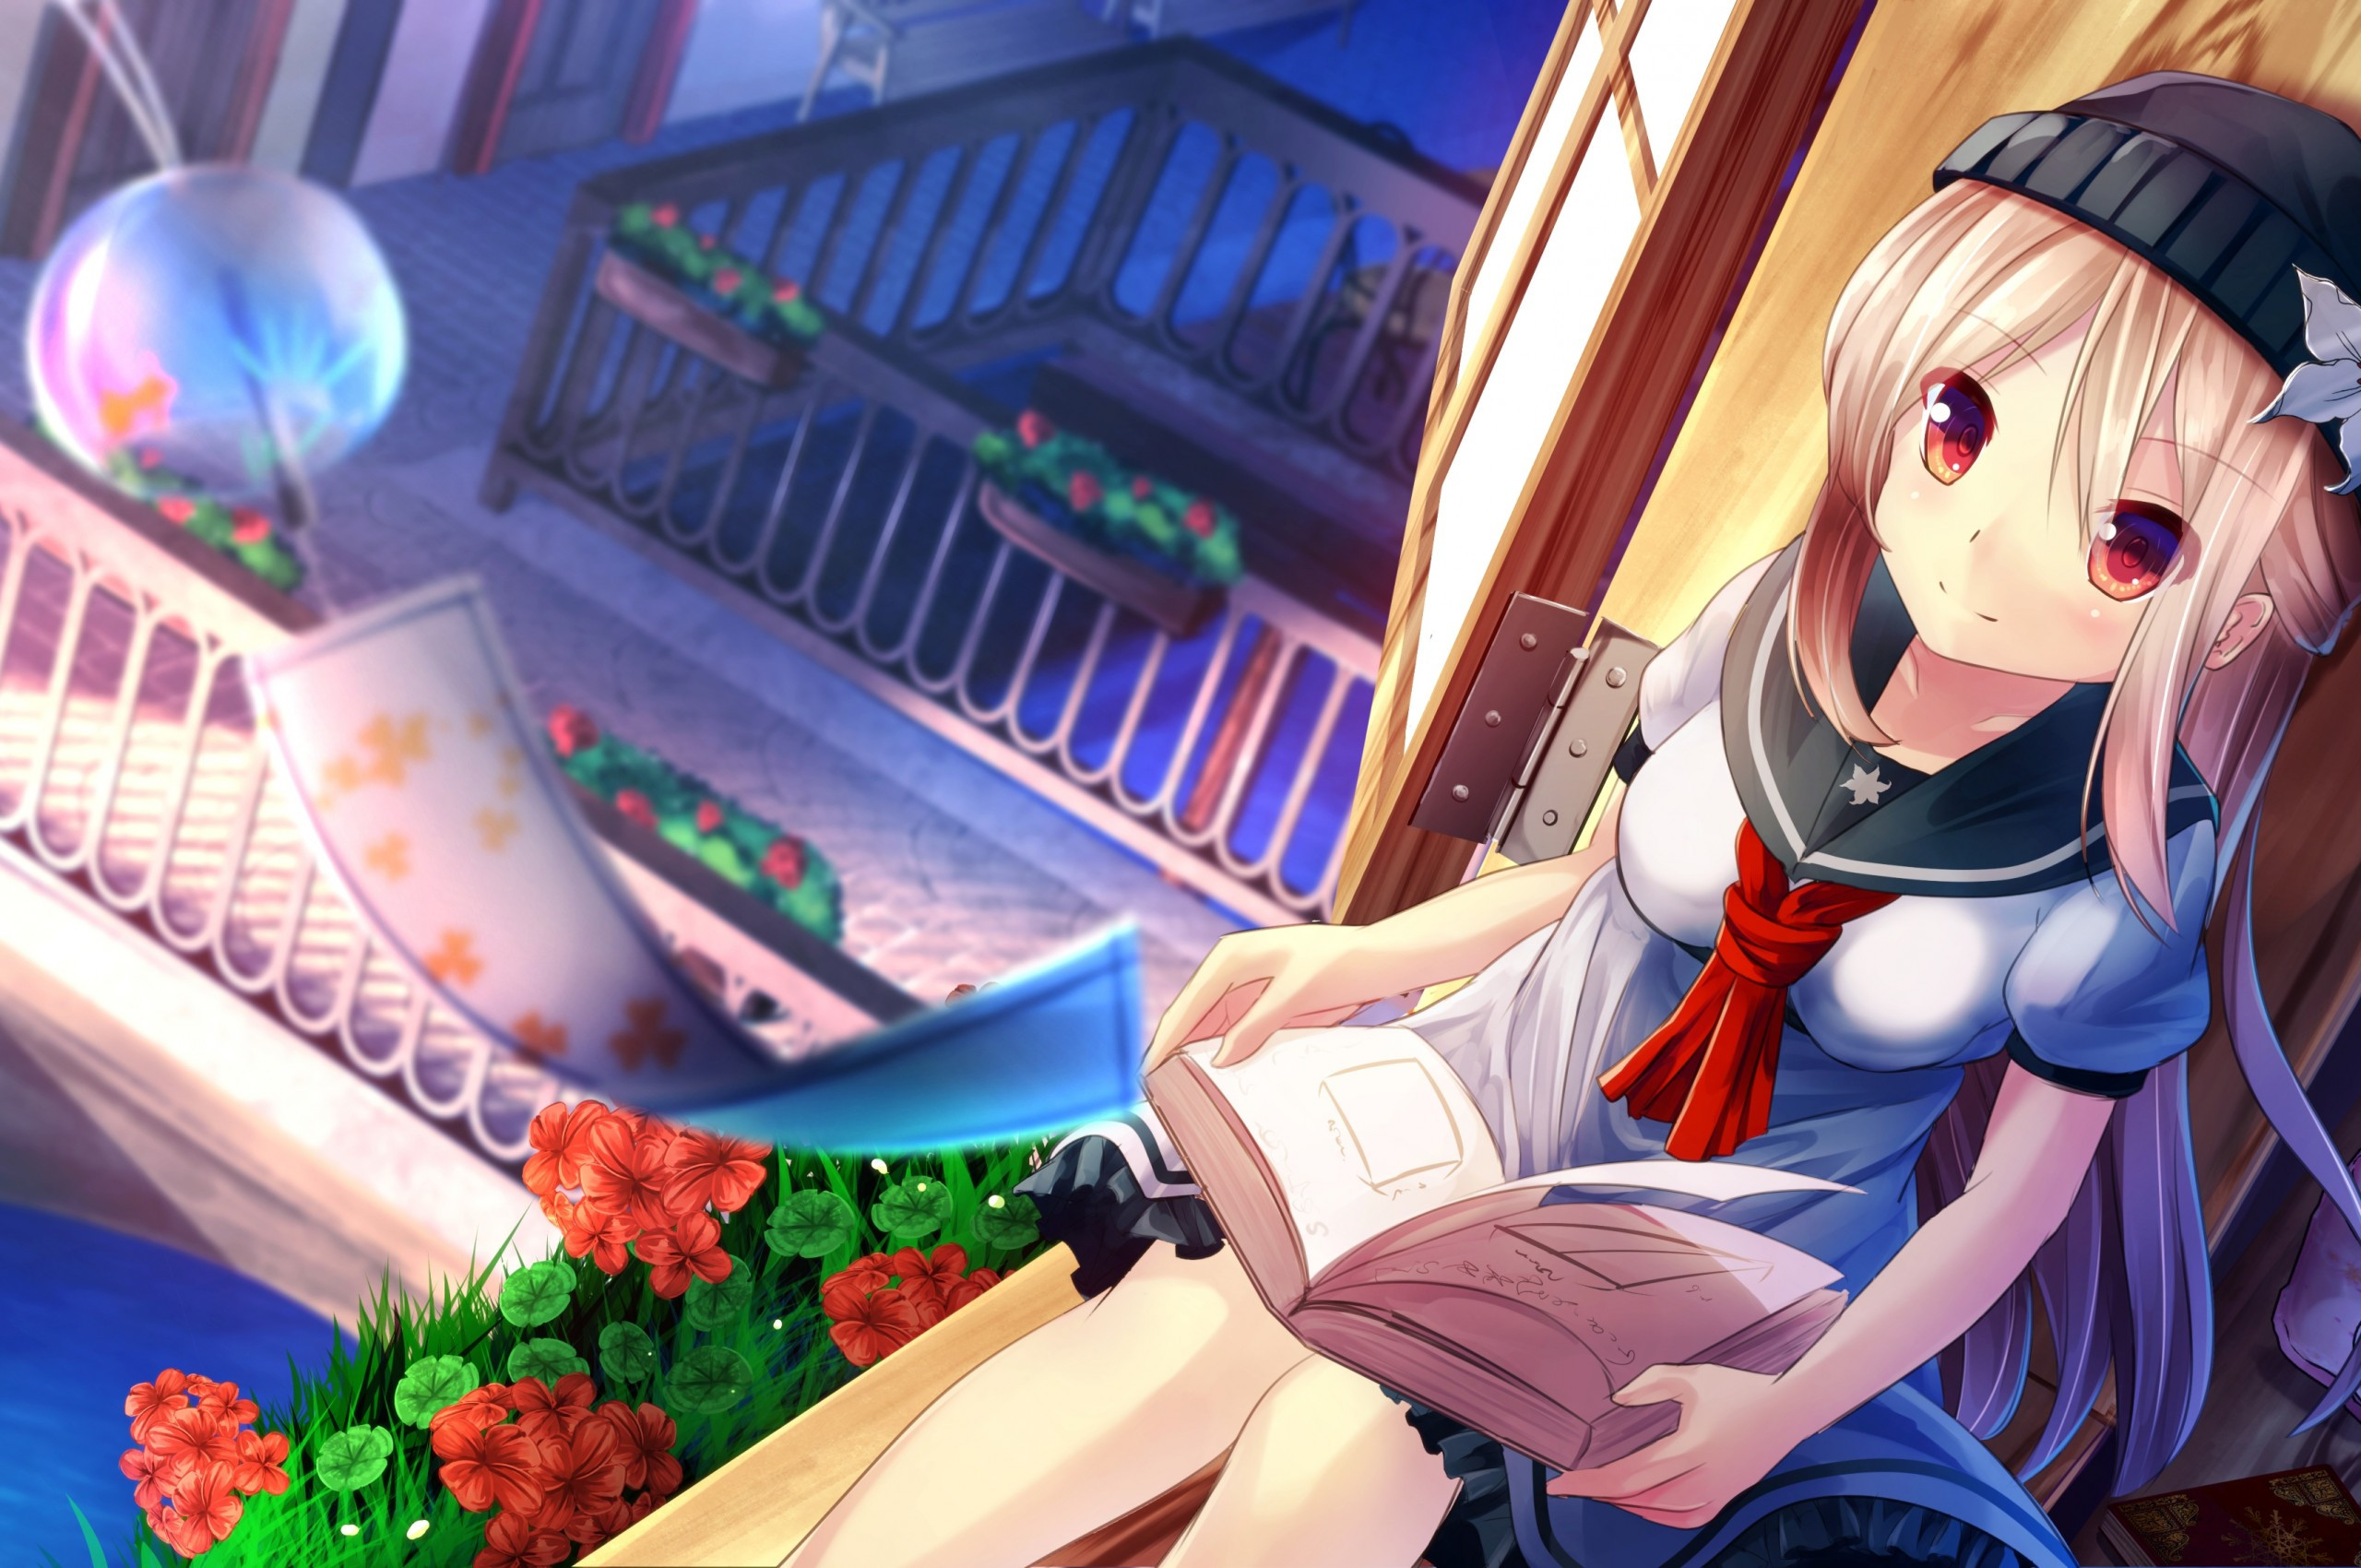 Download 2560x1700 Anime Girl, Sitting, Reading A Book, School Uniform, Wind Wallpaper for Chromebook Pixel